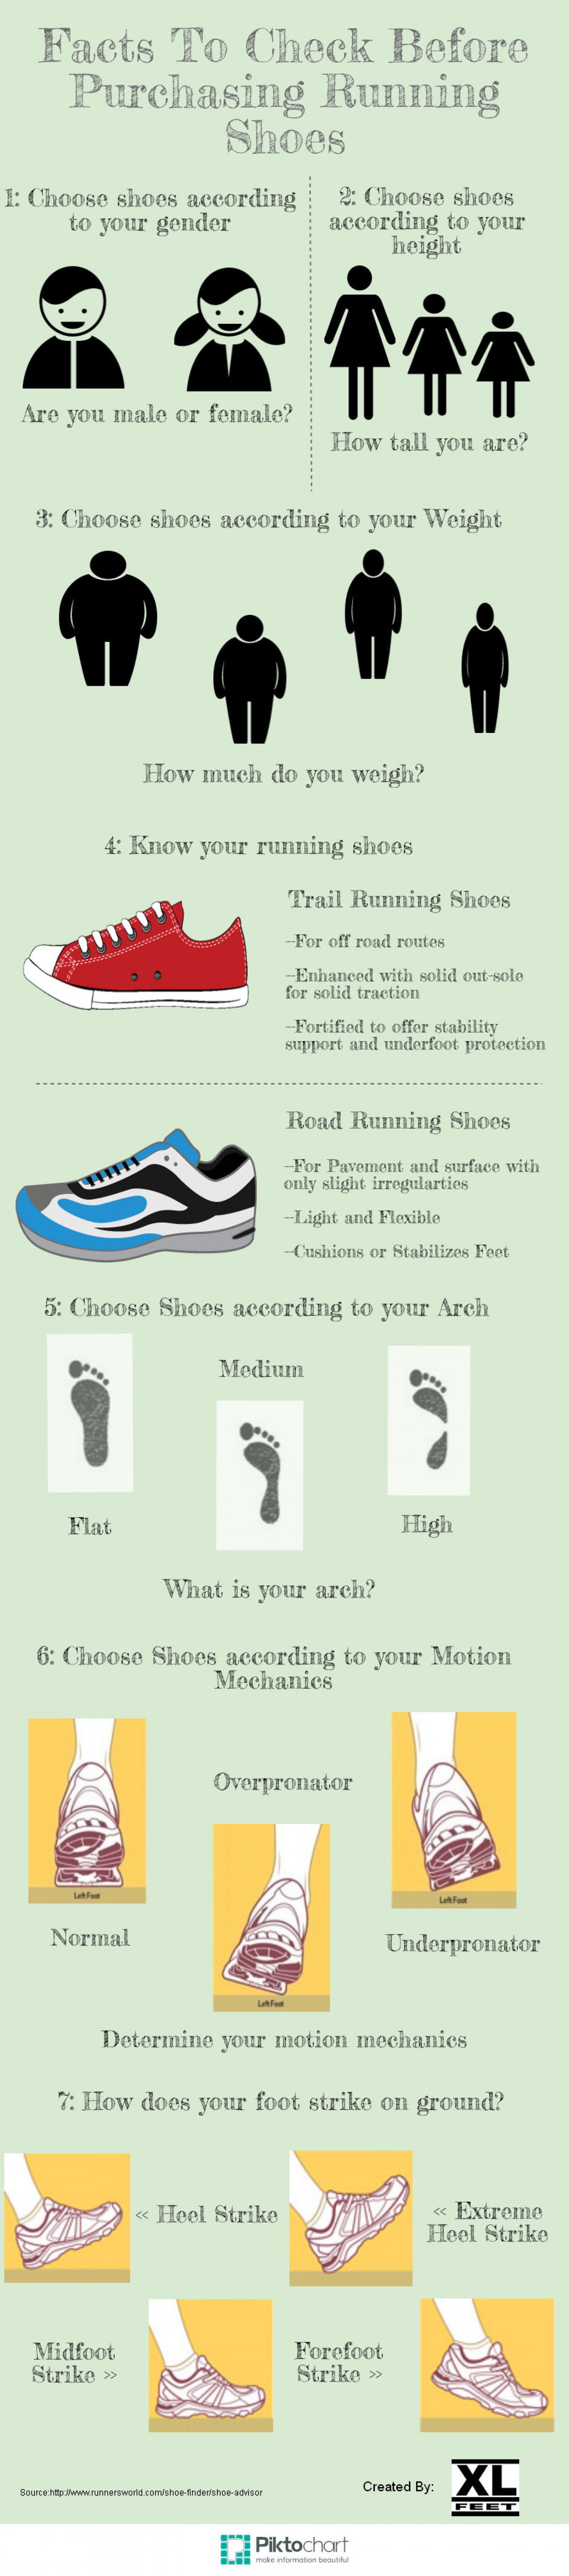 Facts to Know Before Buying Running Shoes! Infographic